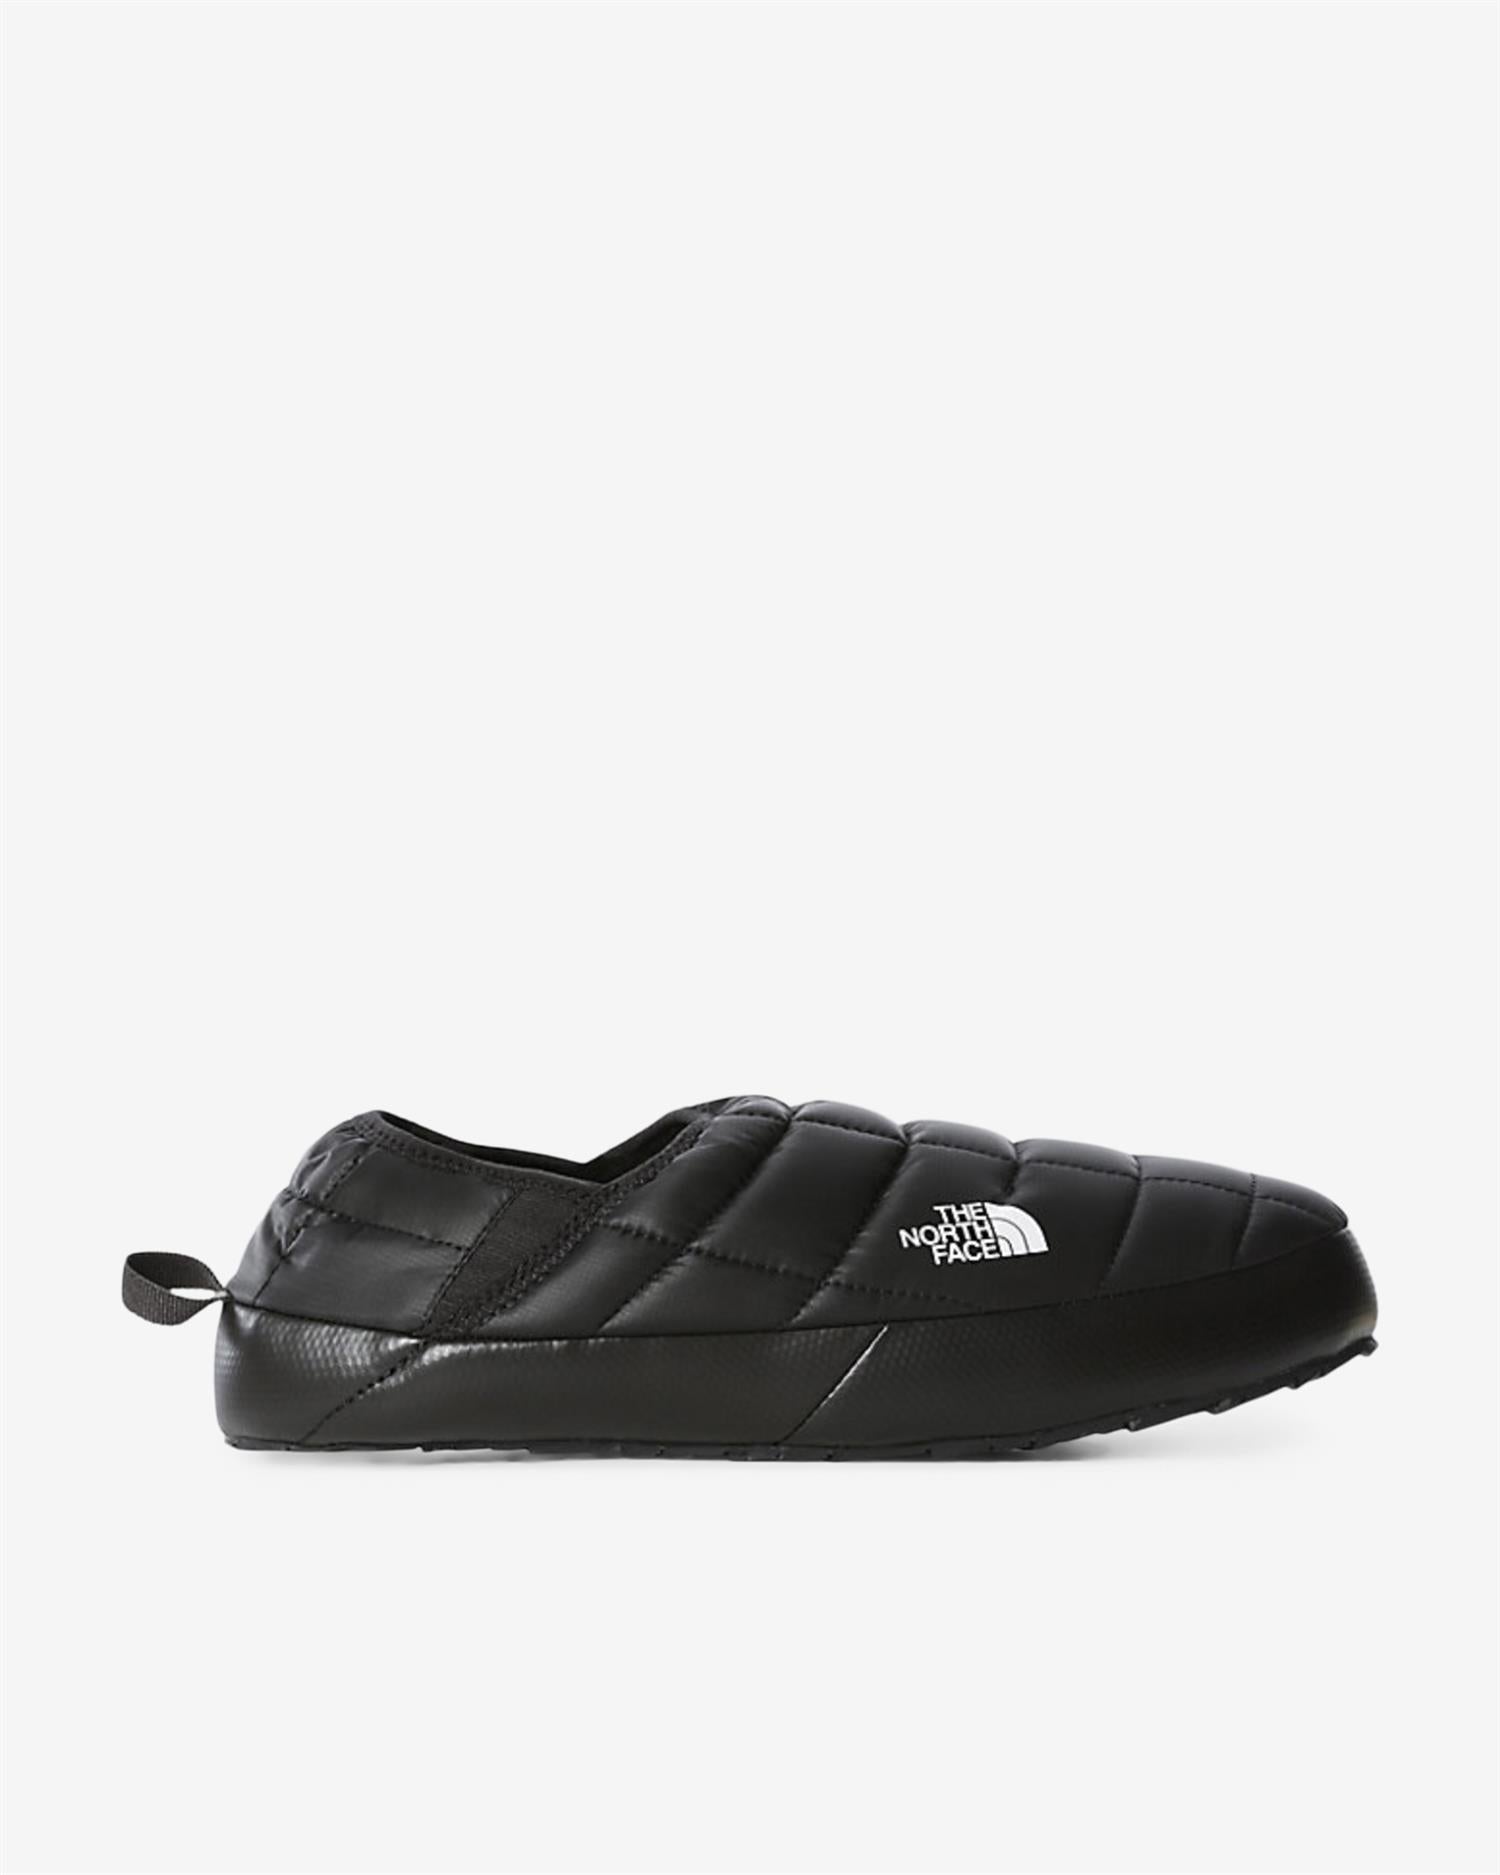 M THERMOBALL MULES - BLACK